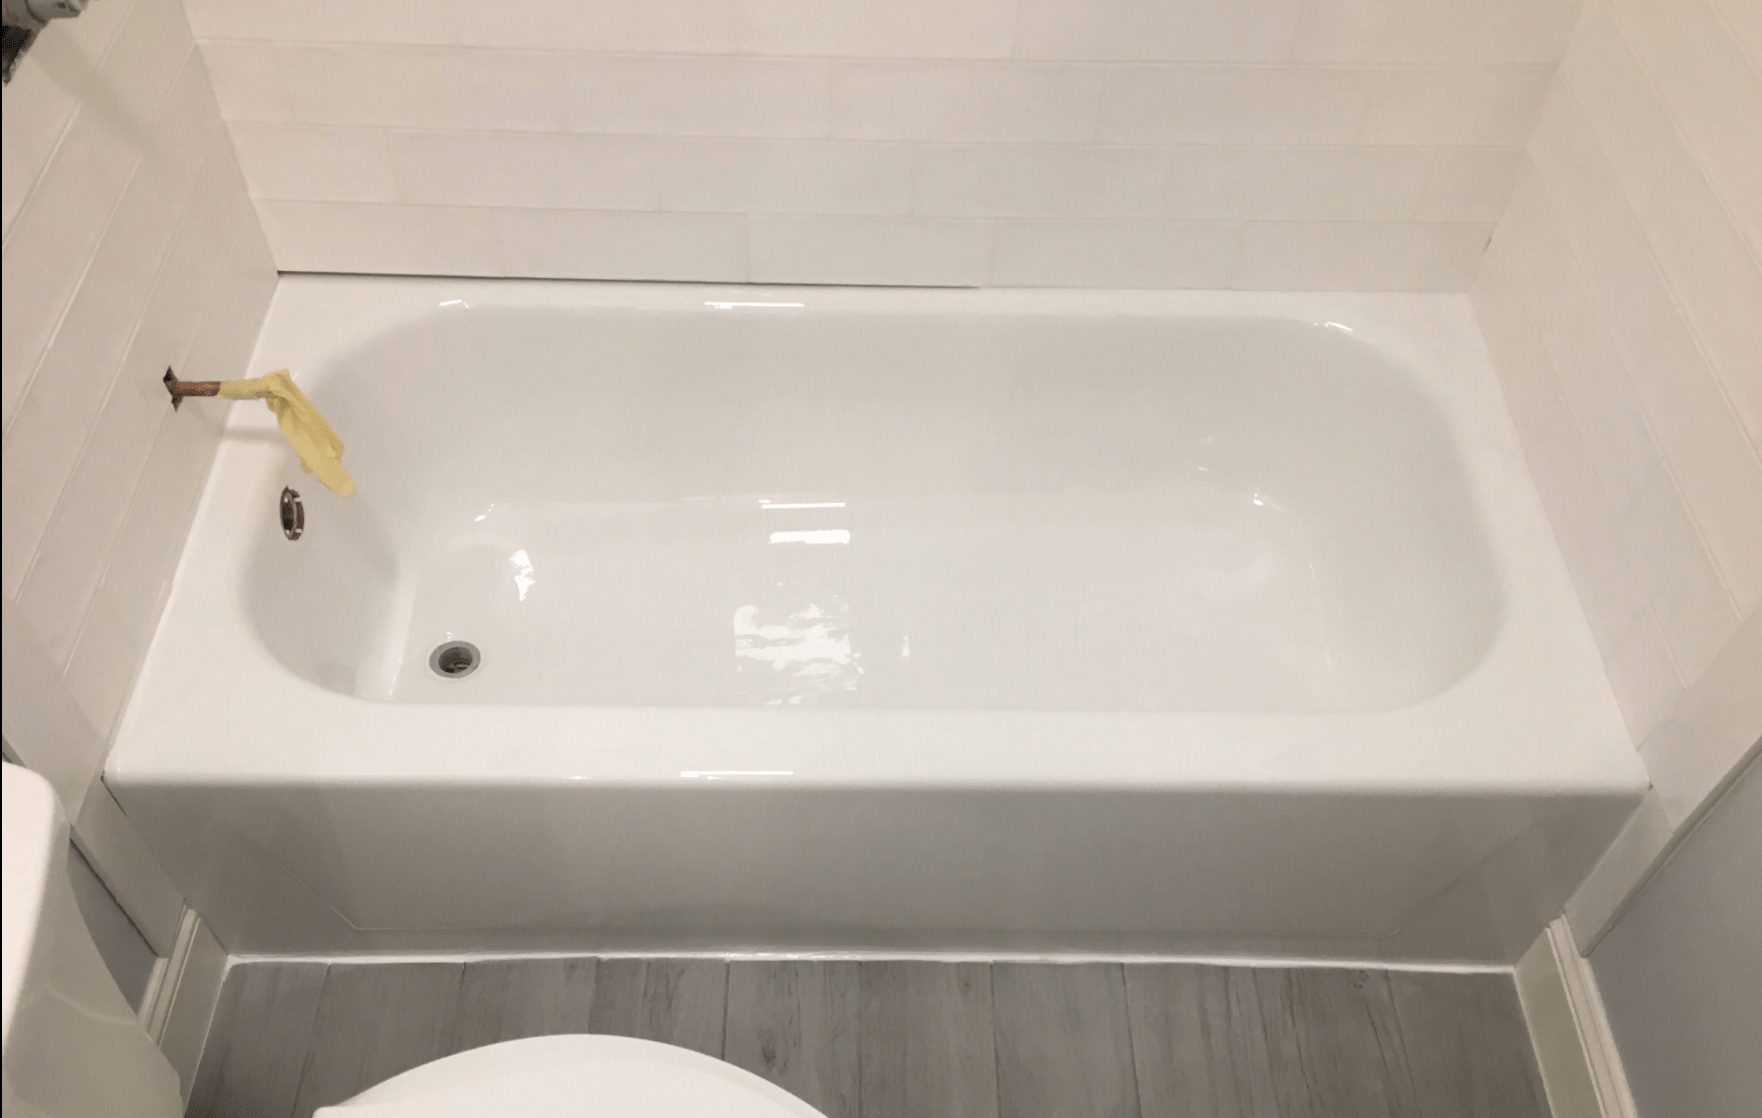 Tub Liner Issues - Budget Refinishers, Inc.